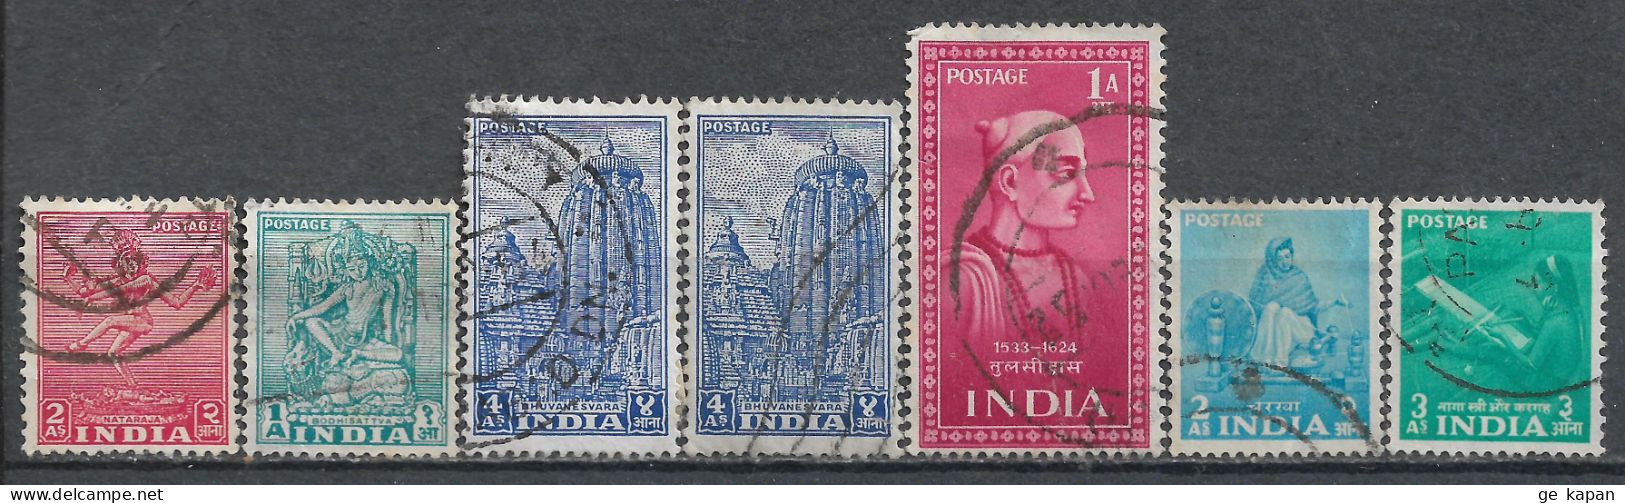 1949-1955 INDIA Set Of 7 Used Stamps (Michel # 195,215,217,222,242,243) - Usati